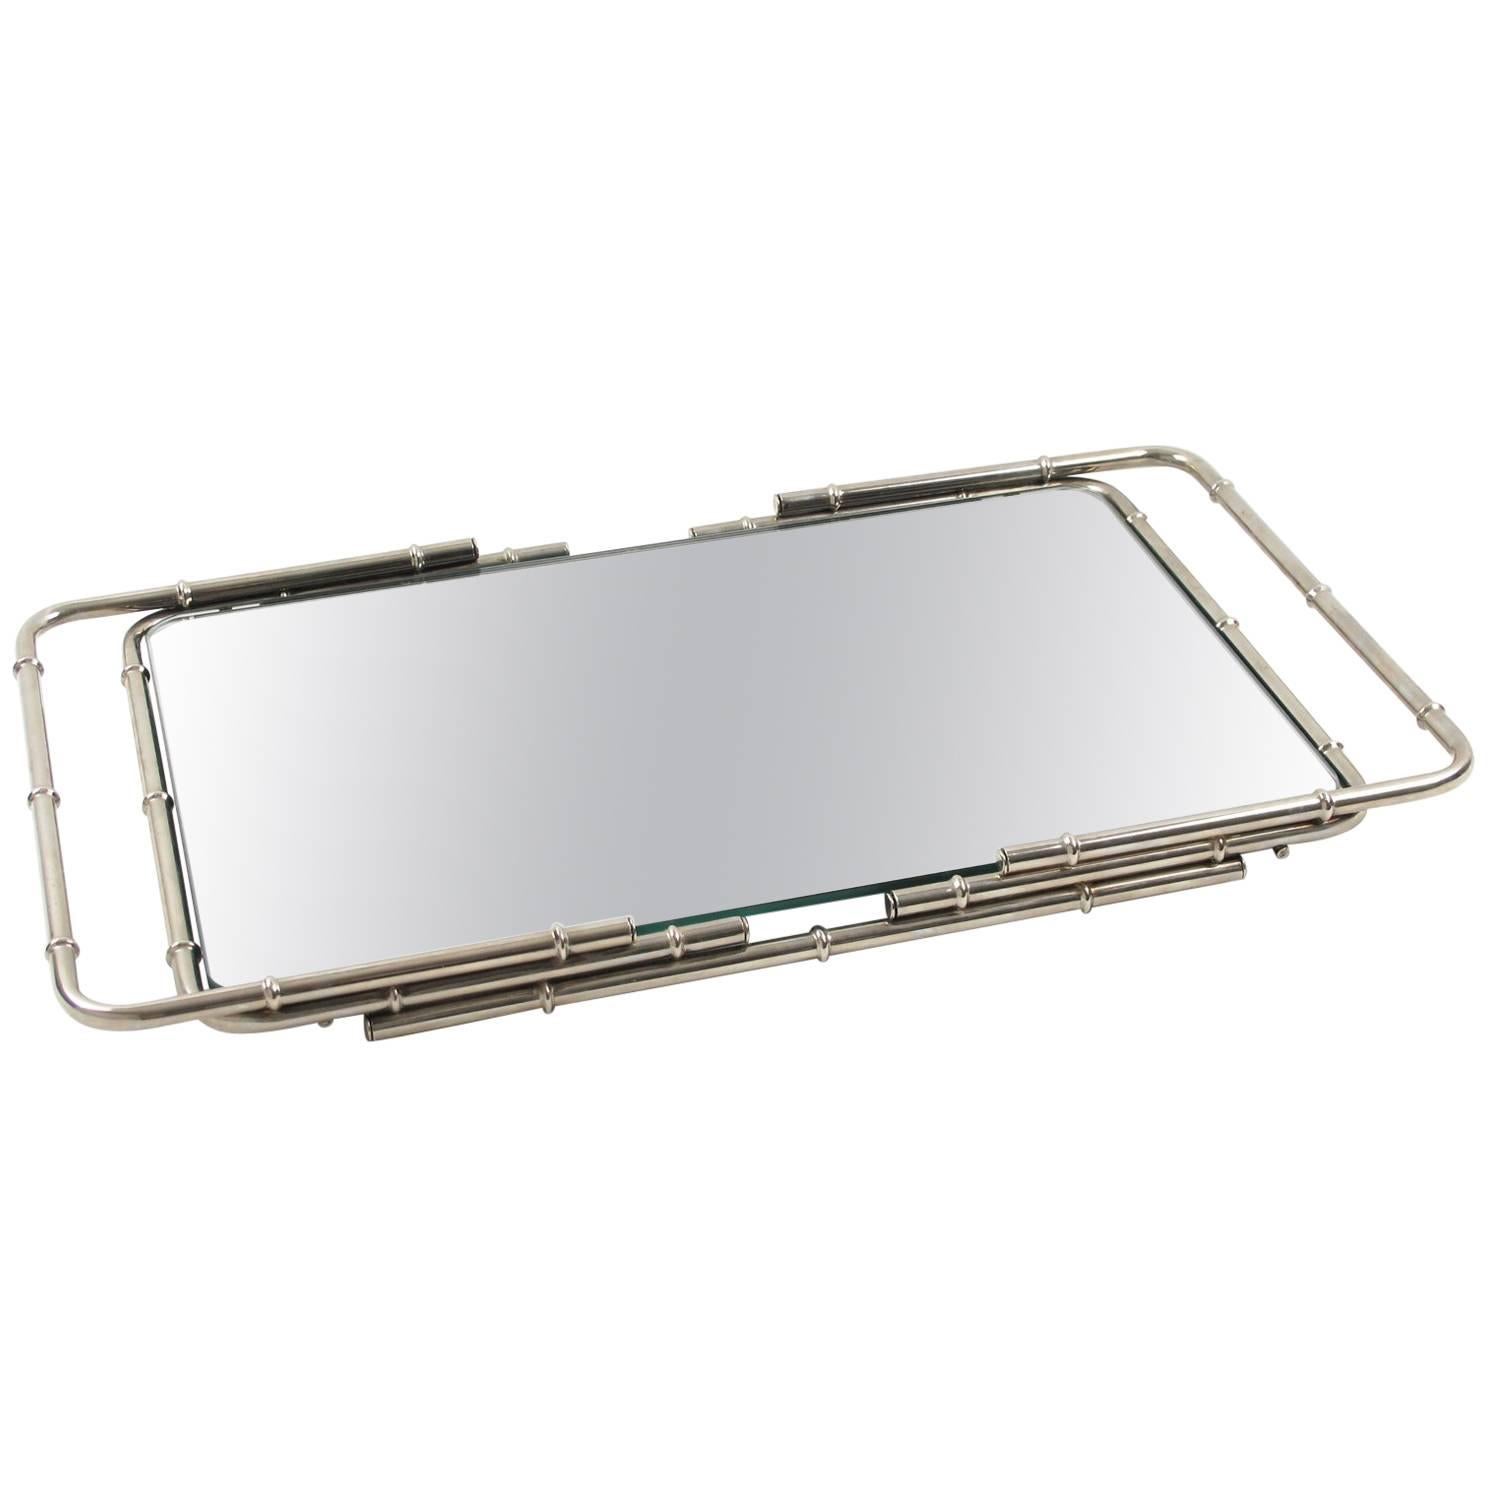 French Modernist Chrome Serving Bar Cocktail Mirror Tray Bamboo Design